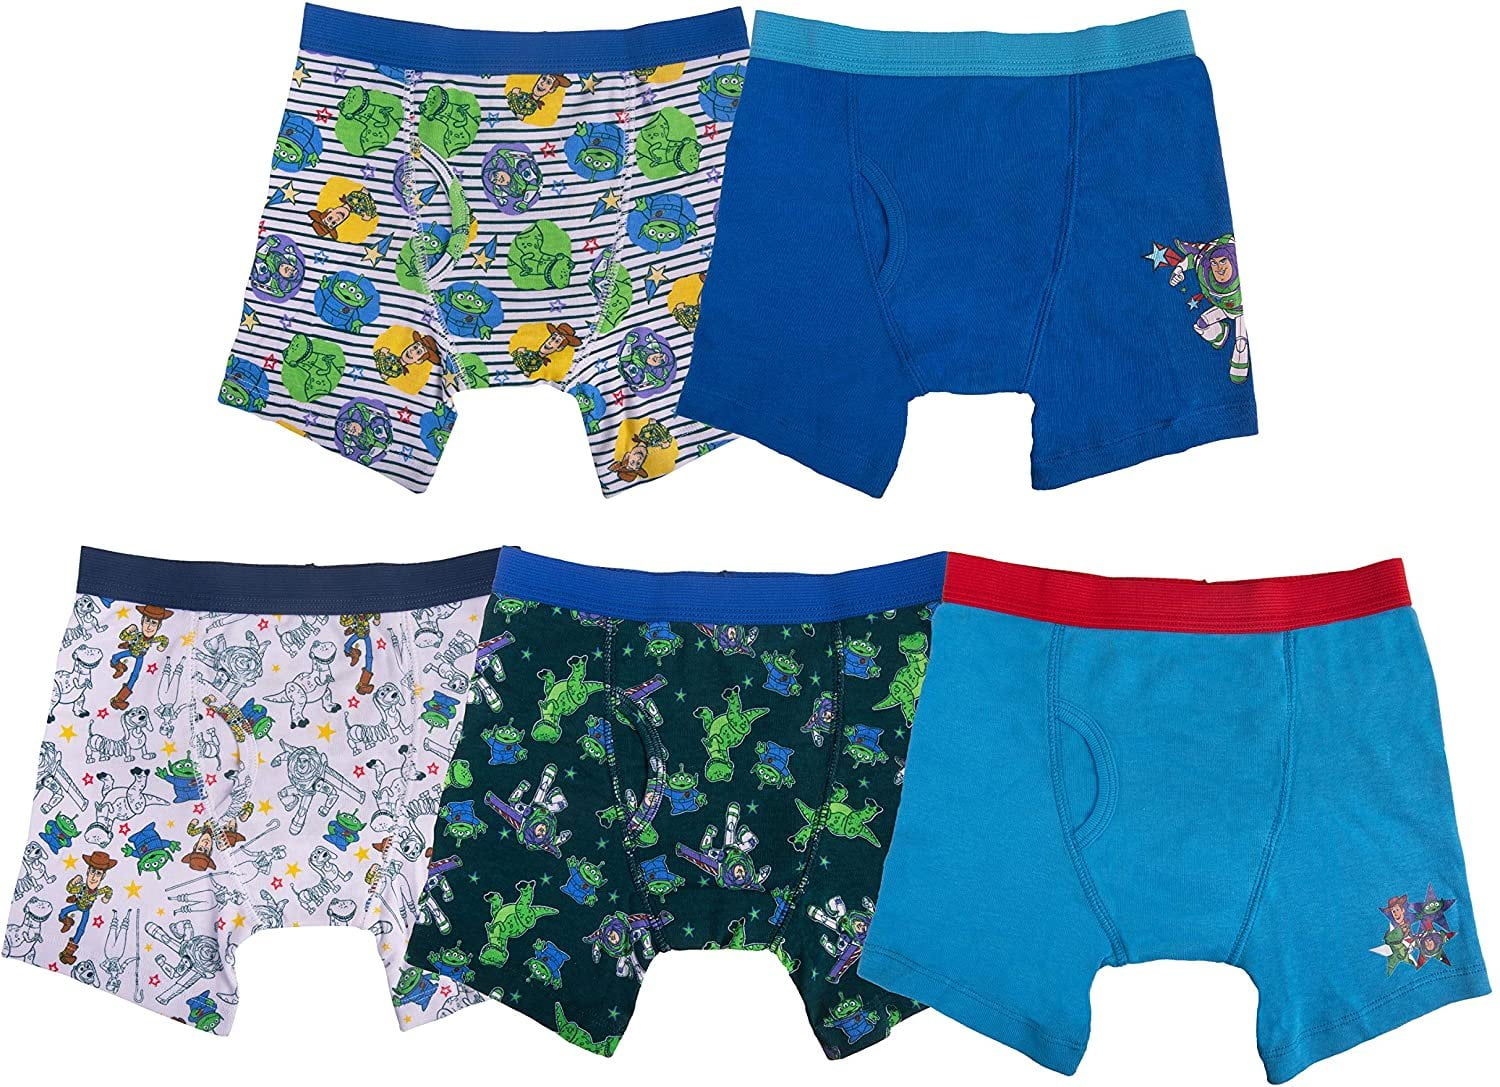 NEW OLD STOCK Toy Story Underwear Boys 3T Handcraft Toy Story and